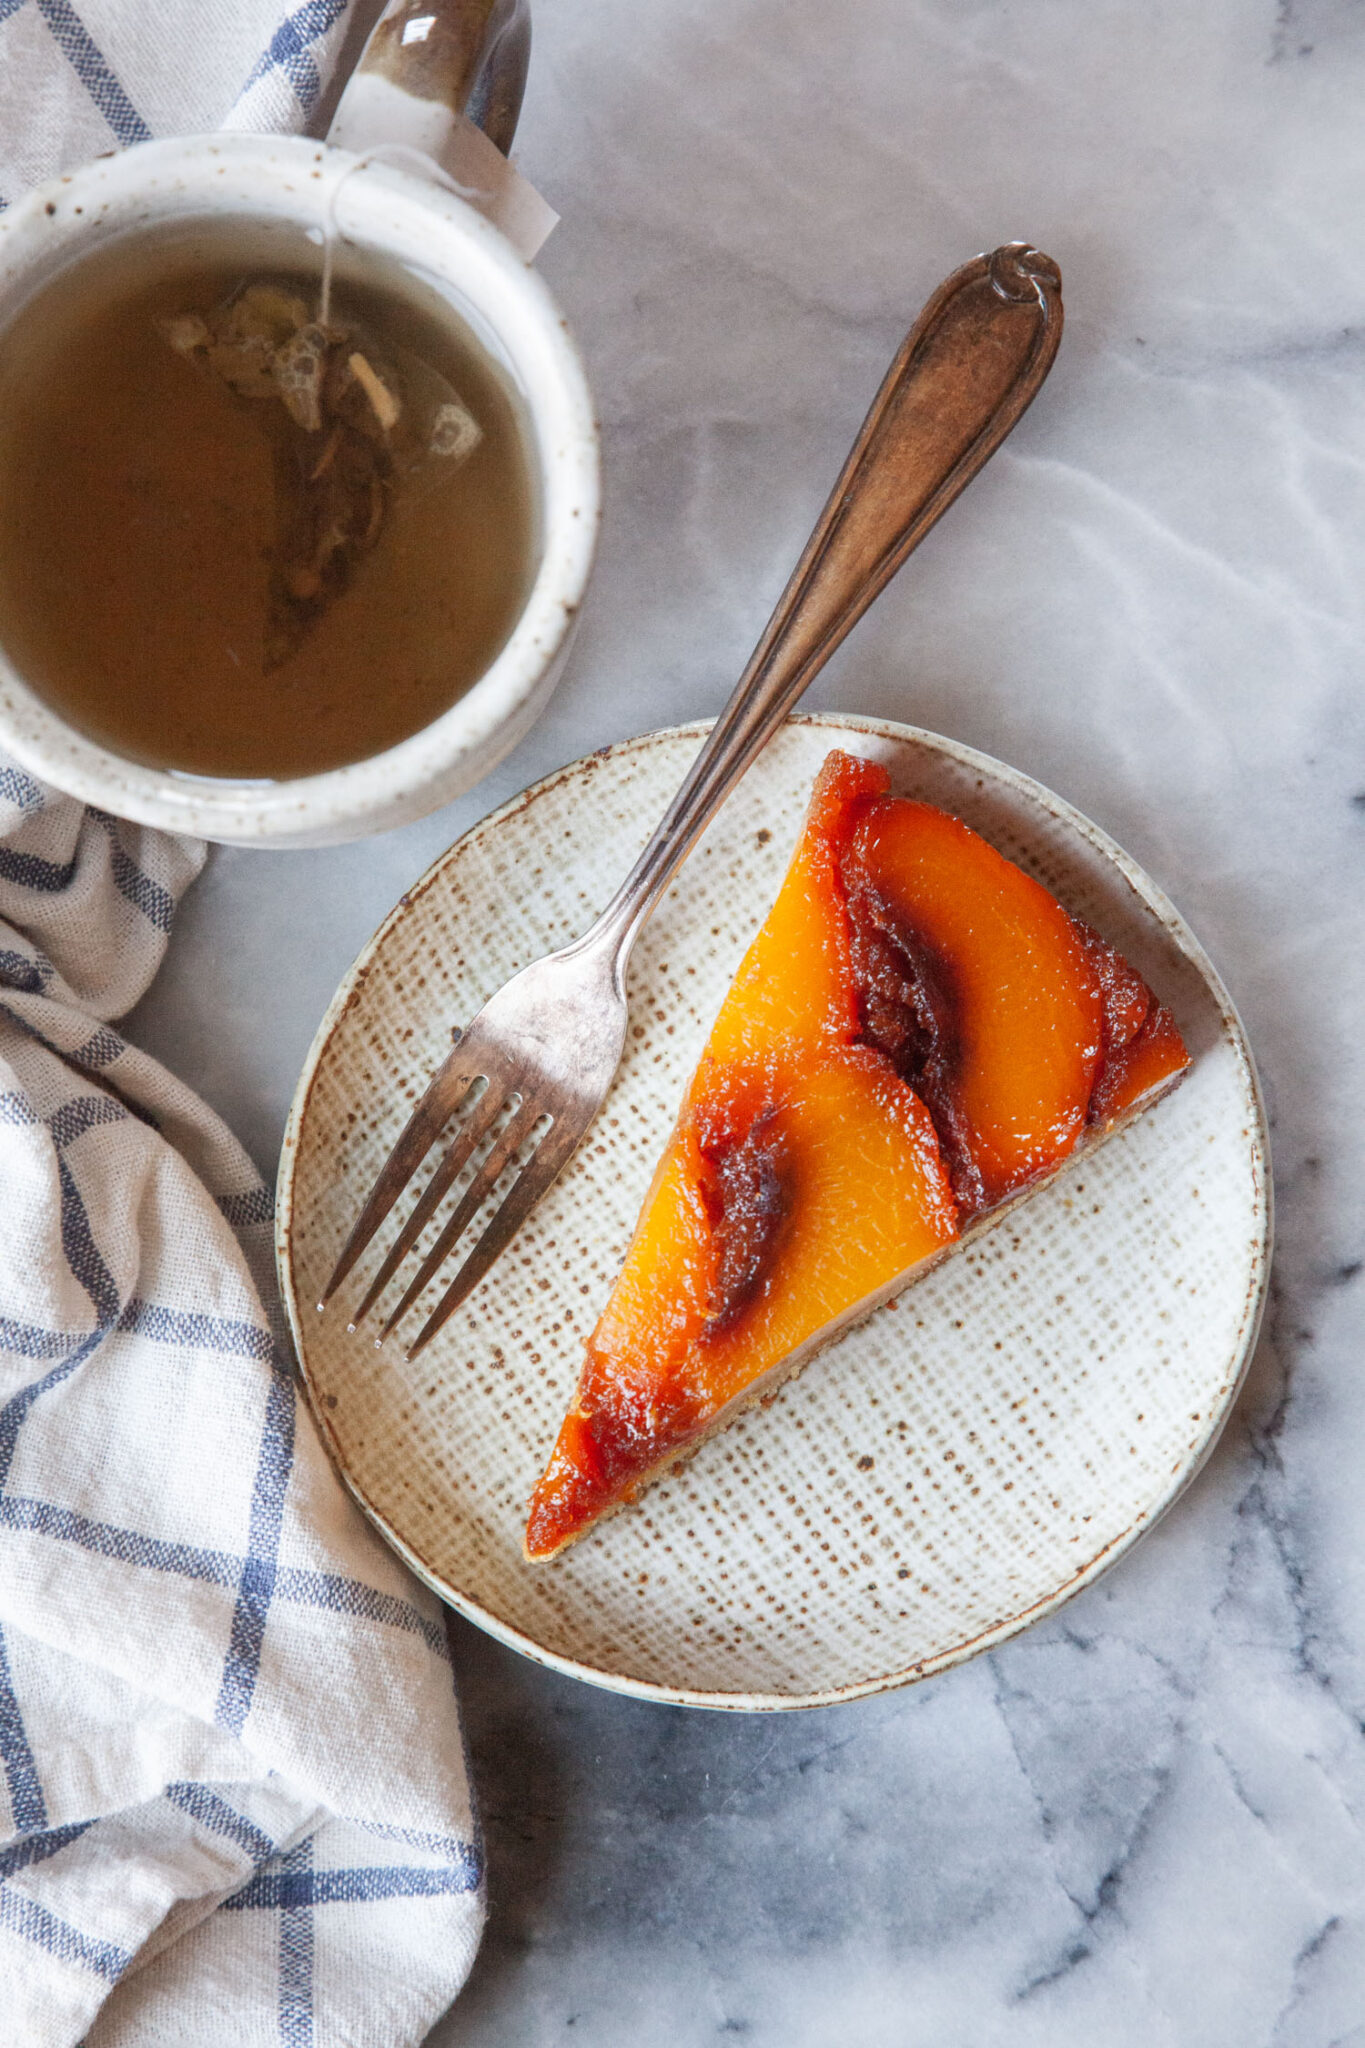 A slice of caramel peach upside down cake on a small plate, with a mug of tea next to it.